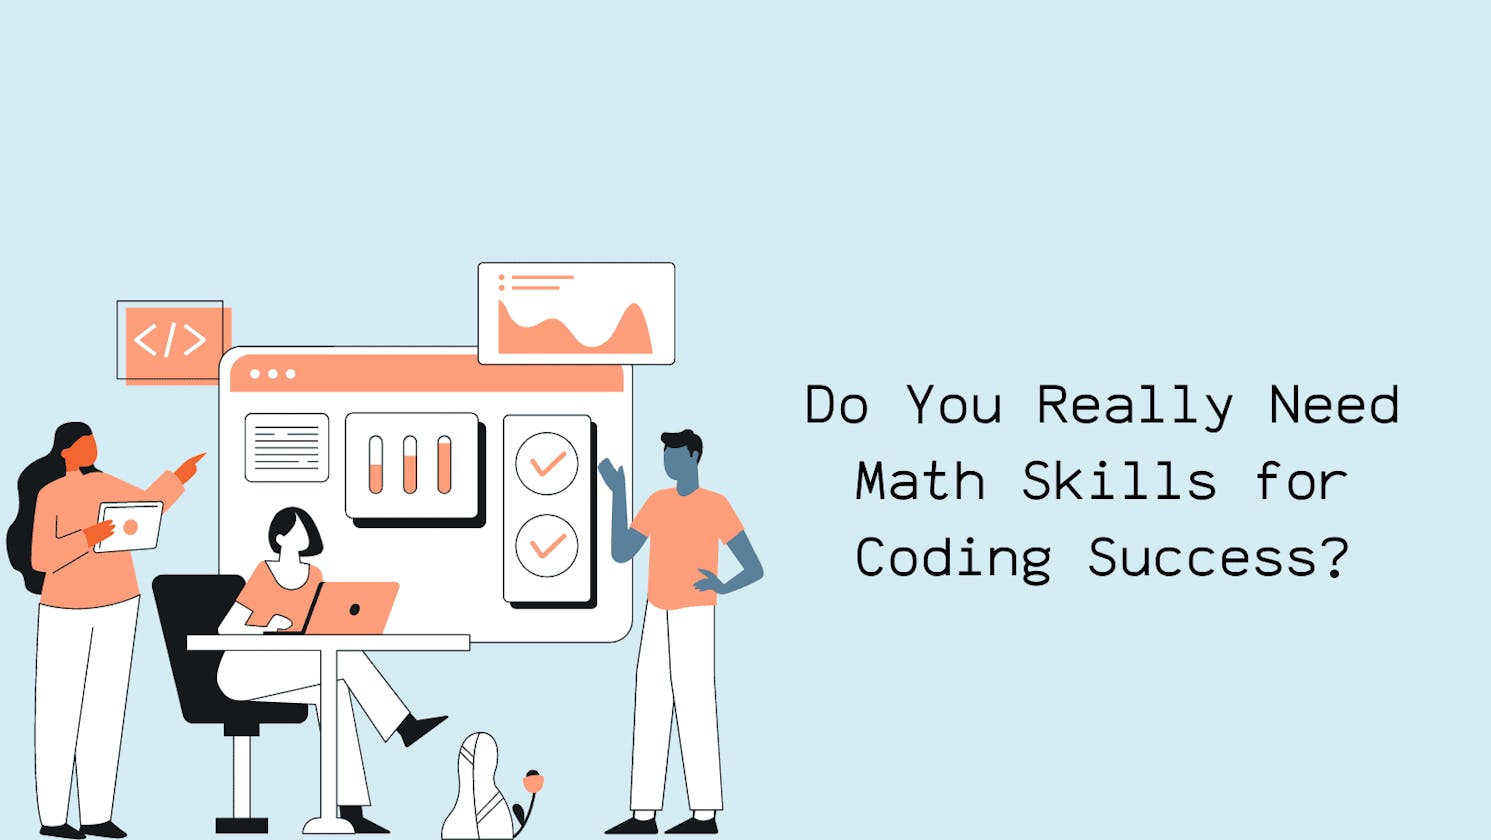 Do You Really Need Math Skills for Coding Success?